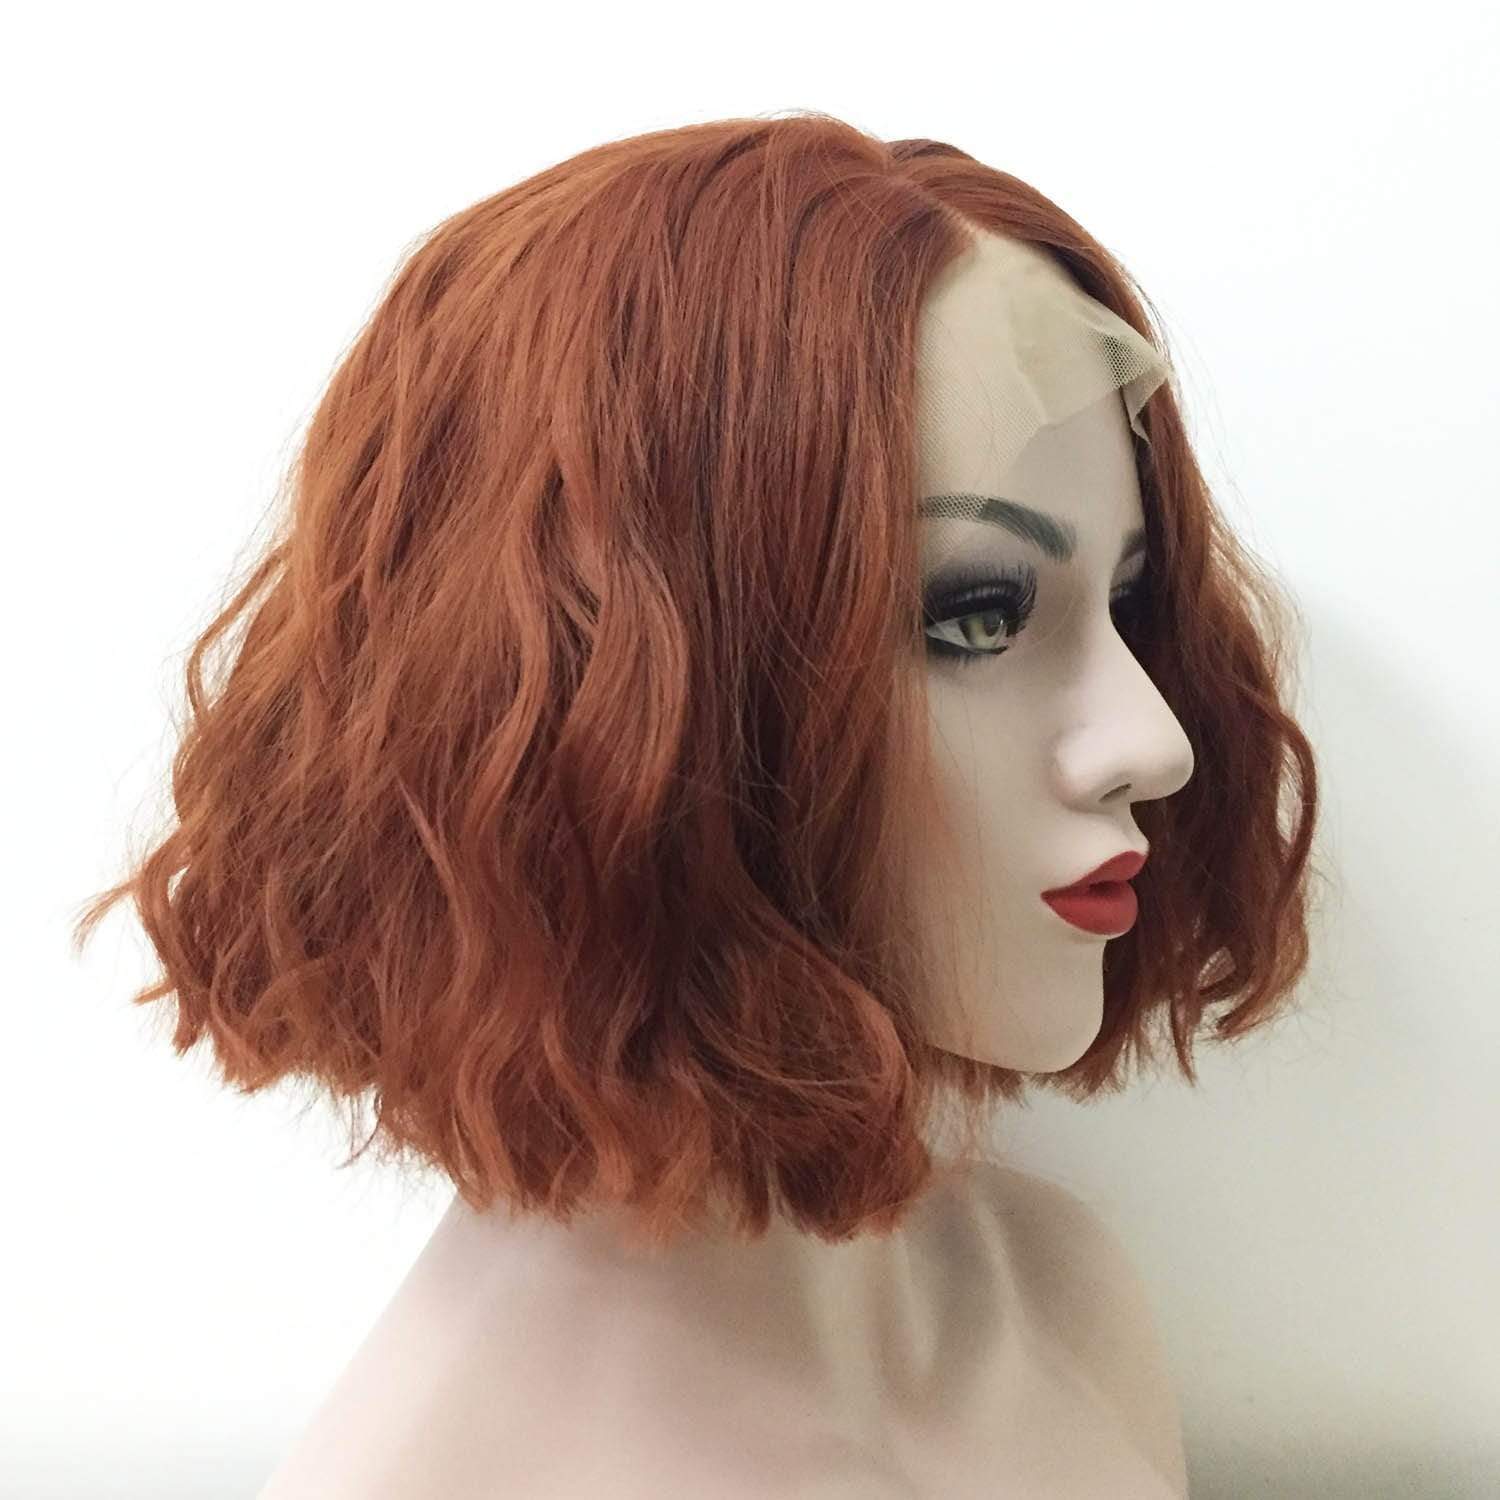 nevermindyrhead Women Lace Front Side Part Auburn Brown Short Curly Wig